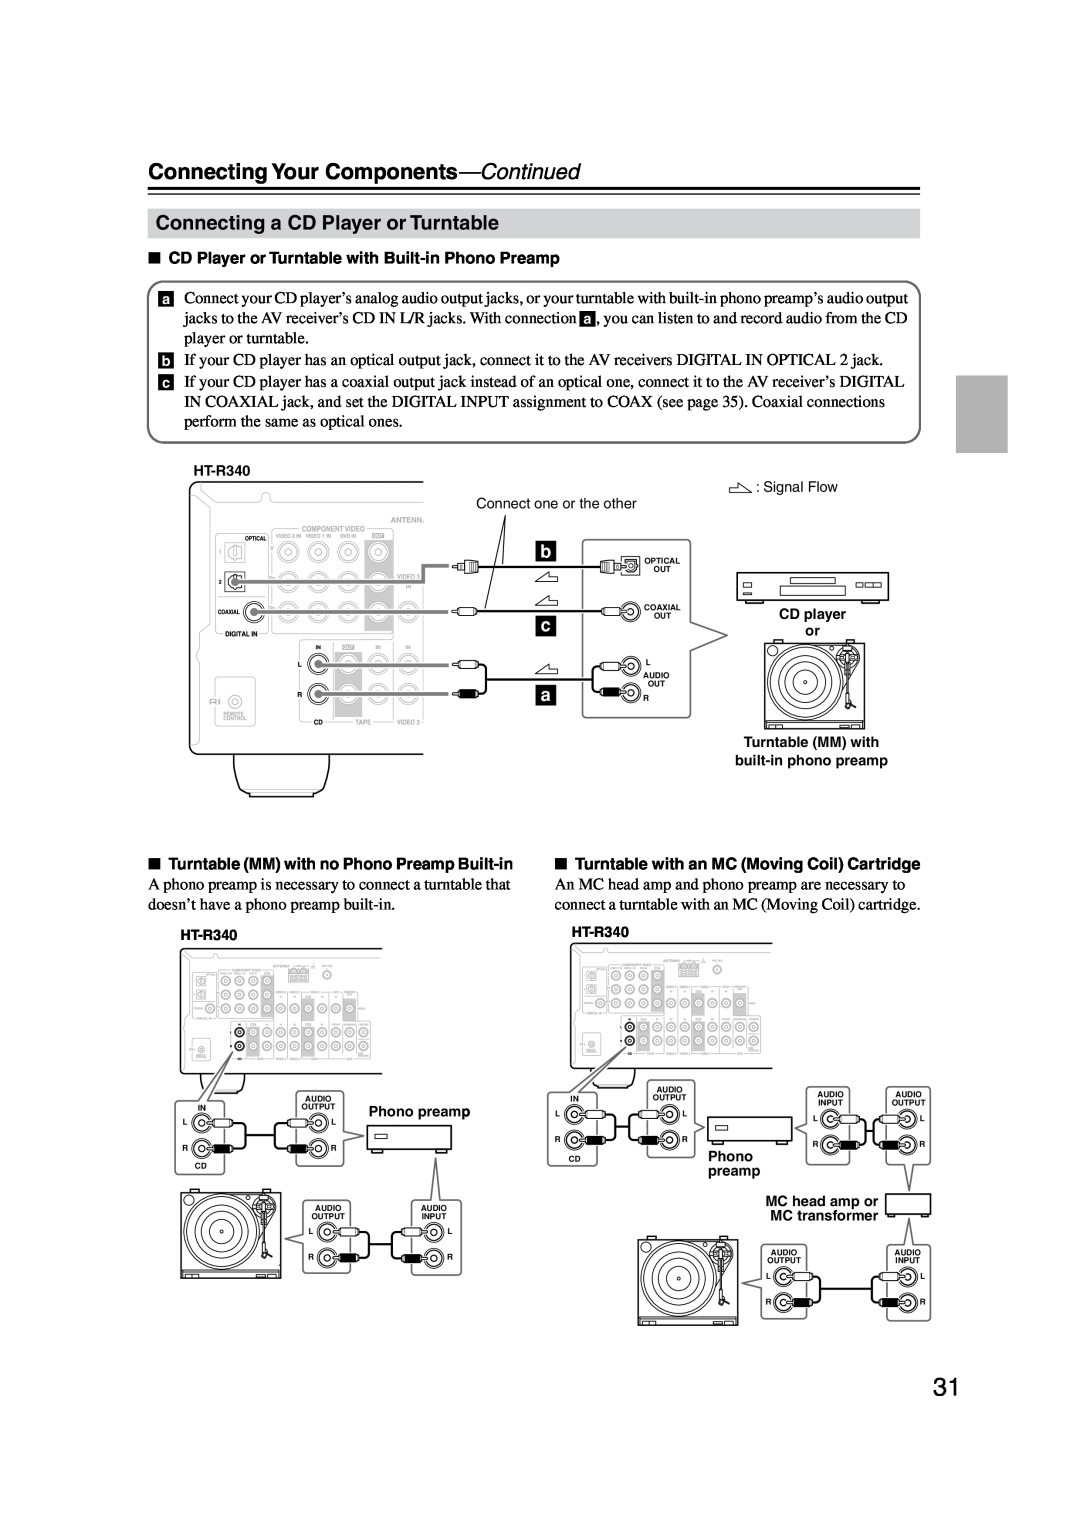 Onkyo HT-S590 instruction manual Connecting a CD Player or Turntable, Connecting Your Components-Continued 